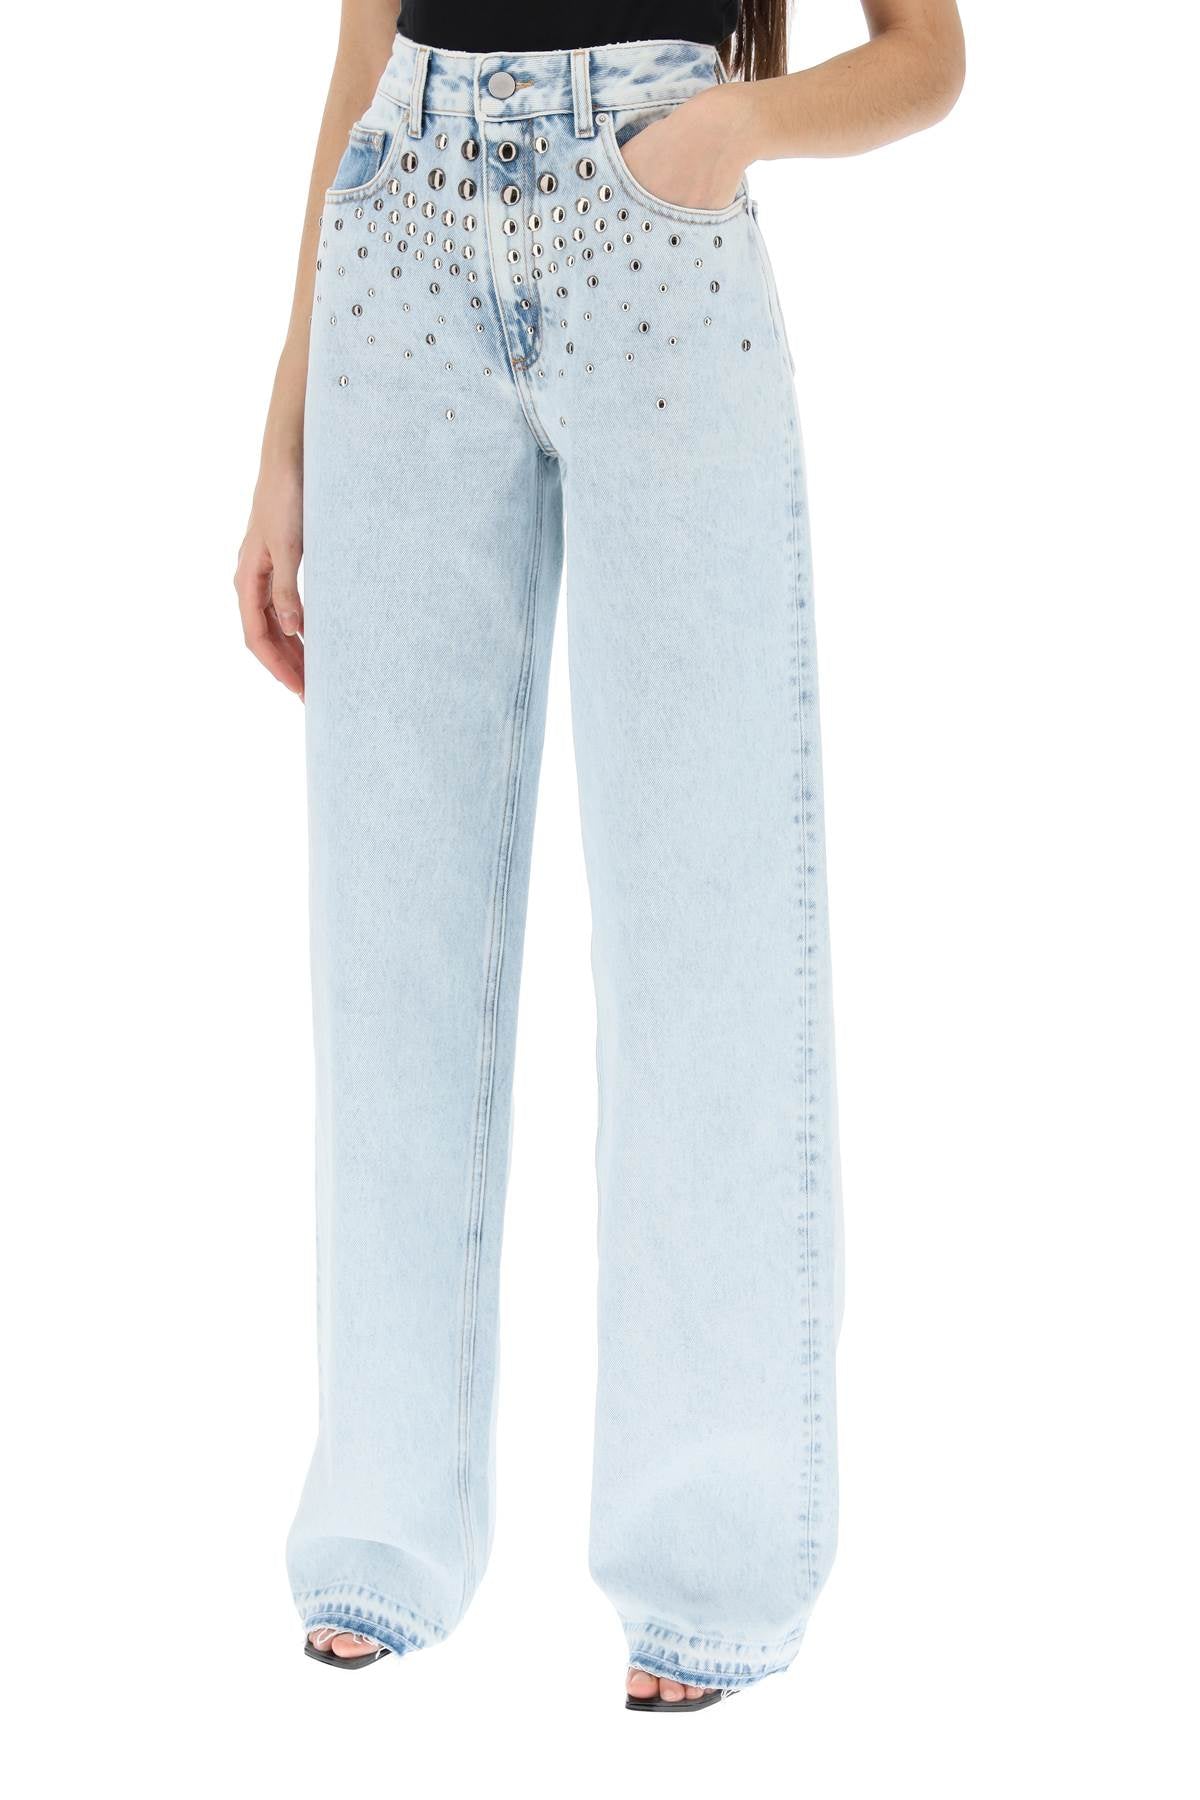 Alessandra rich jeans with studs-3